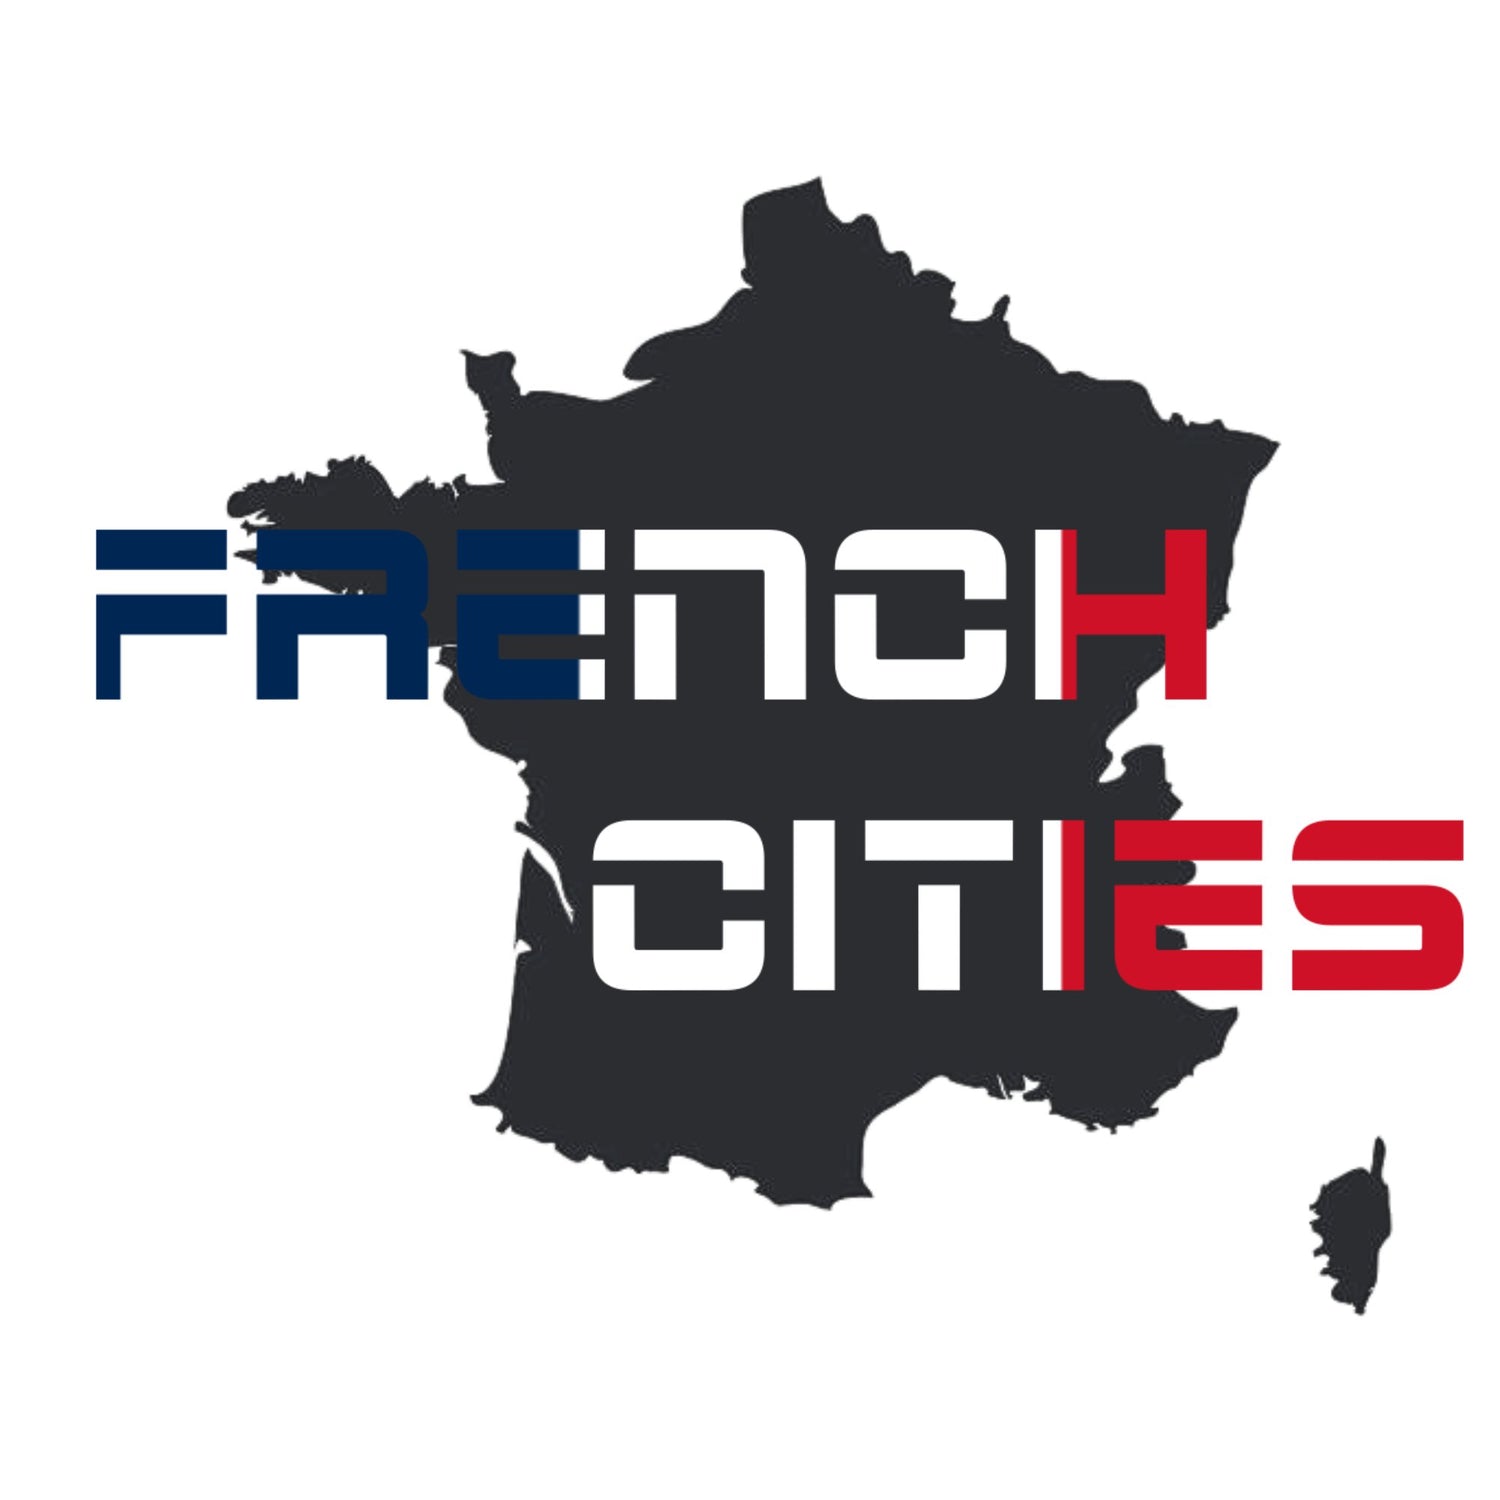 French Cities - Le Traileur Anonyme